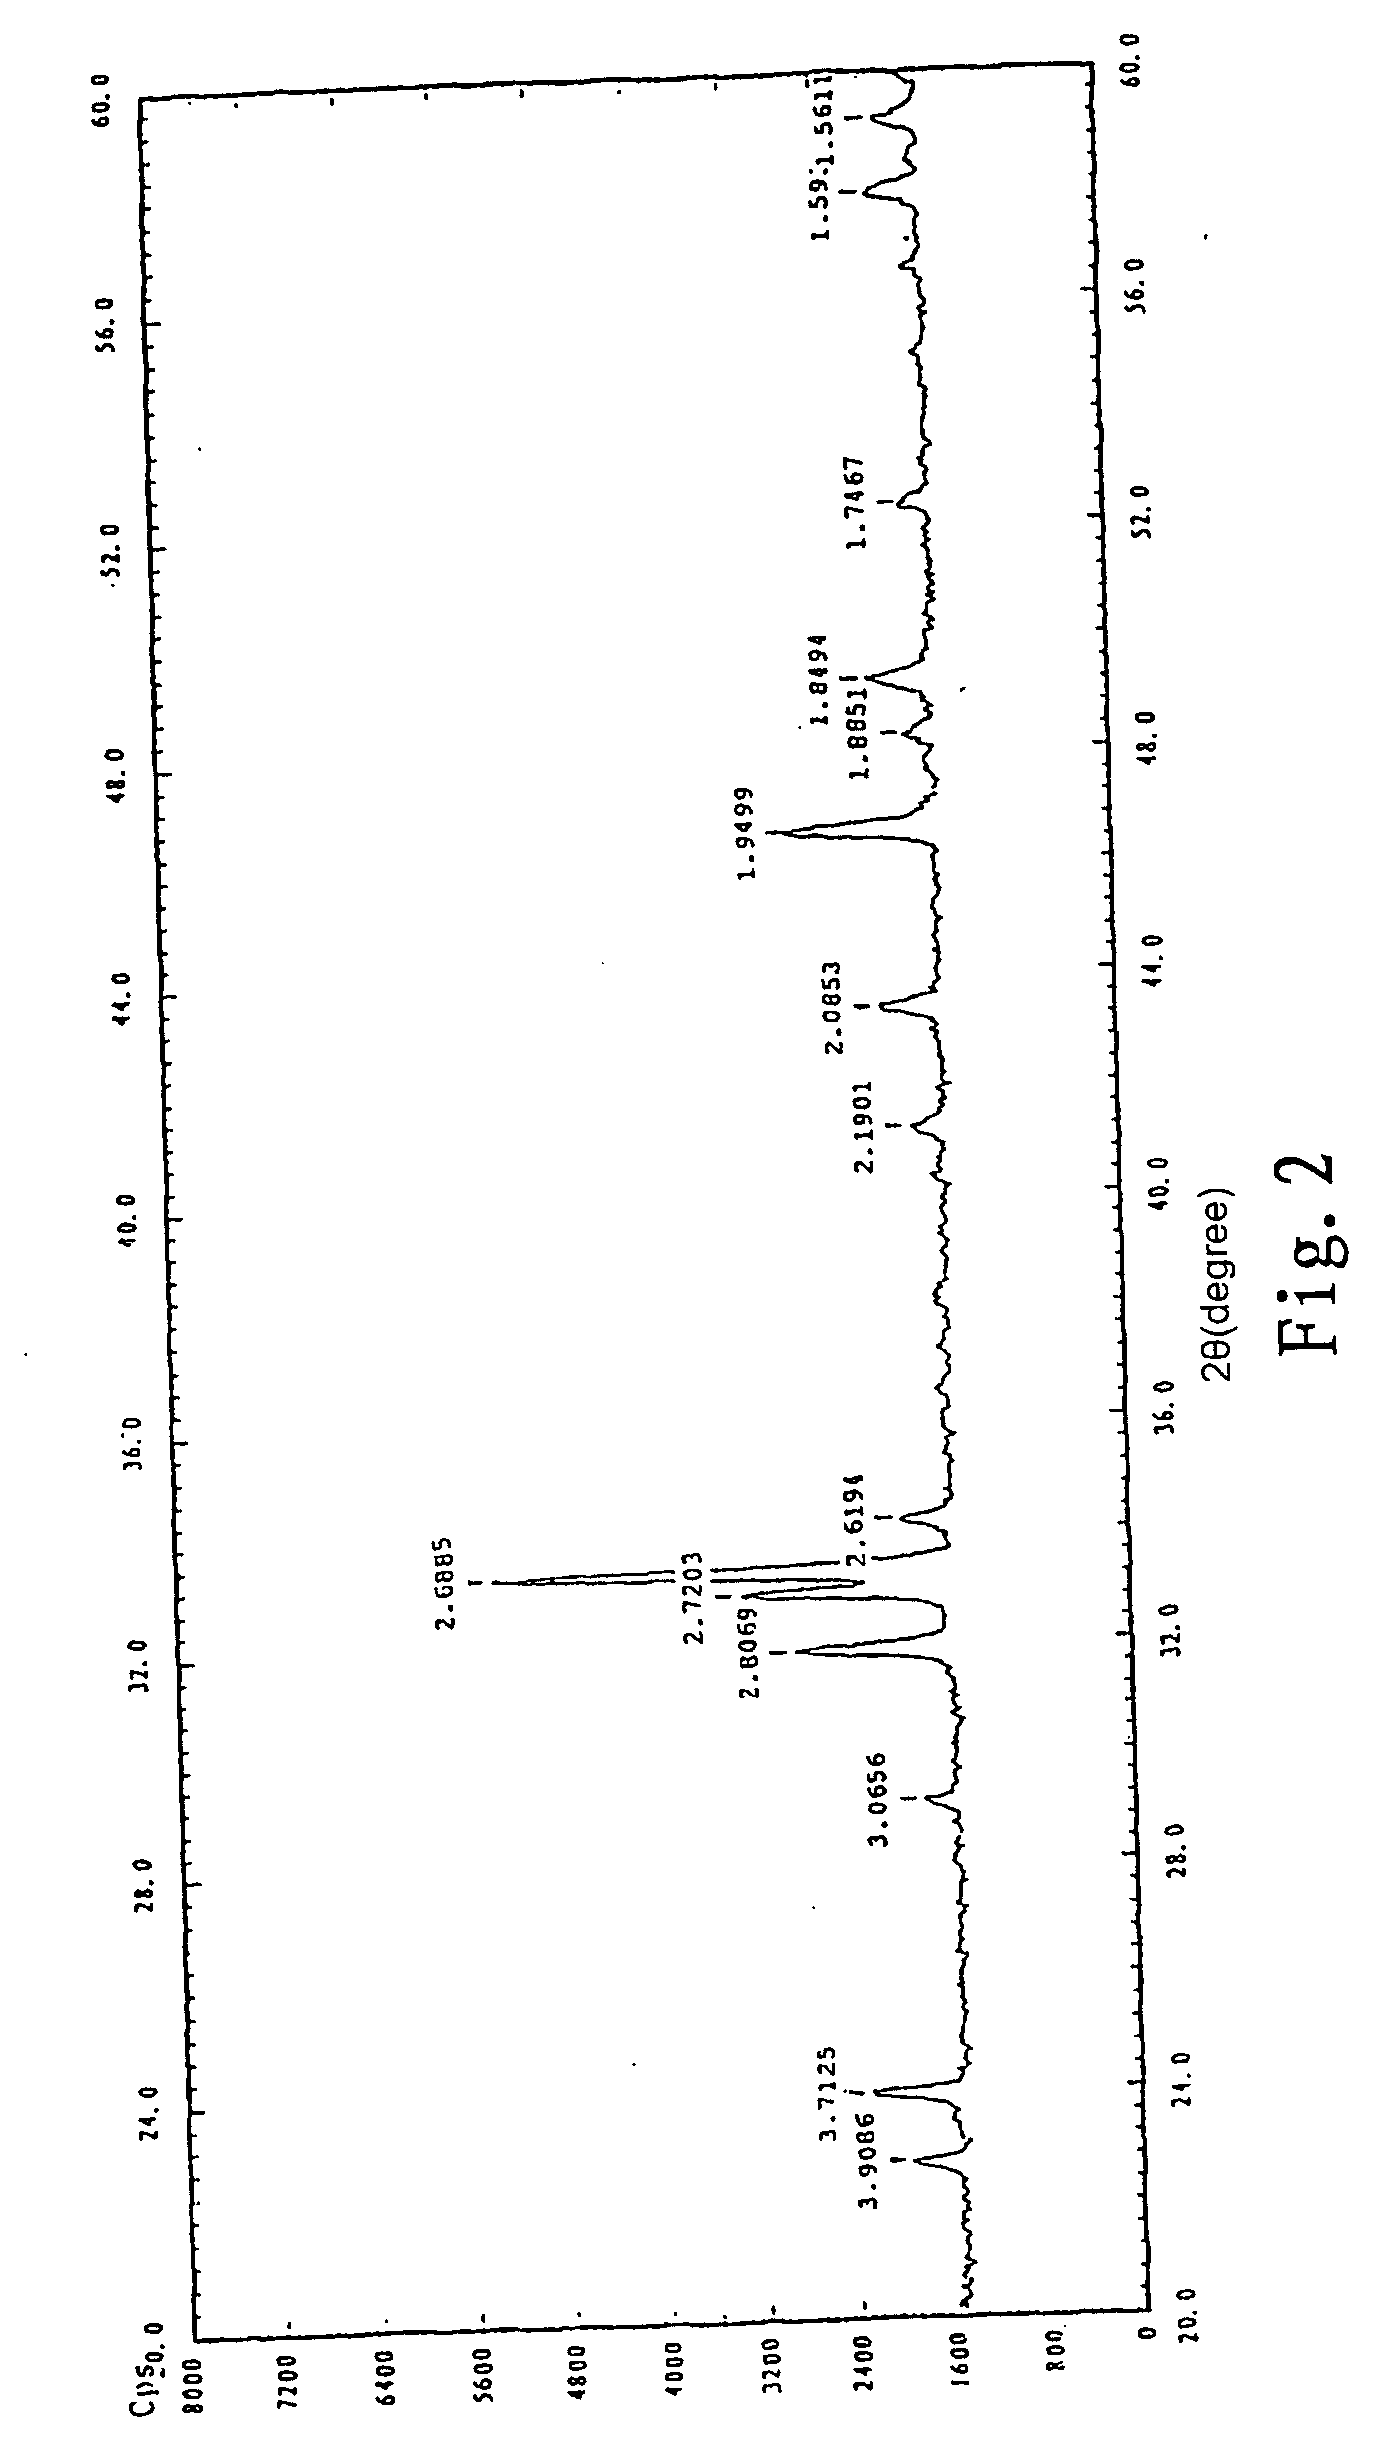 Process for commercial-scale refining liquefied petroleum gas